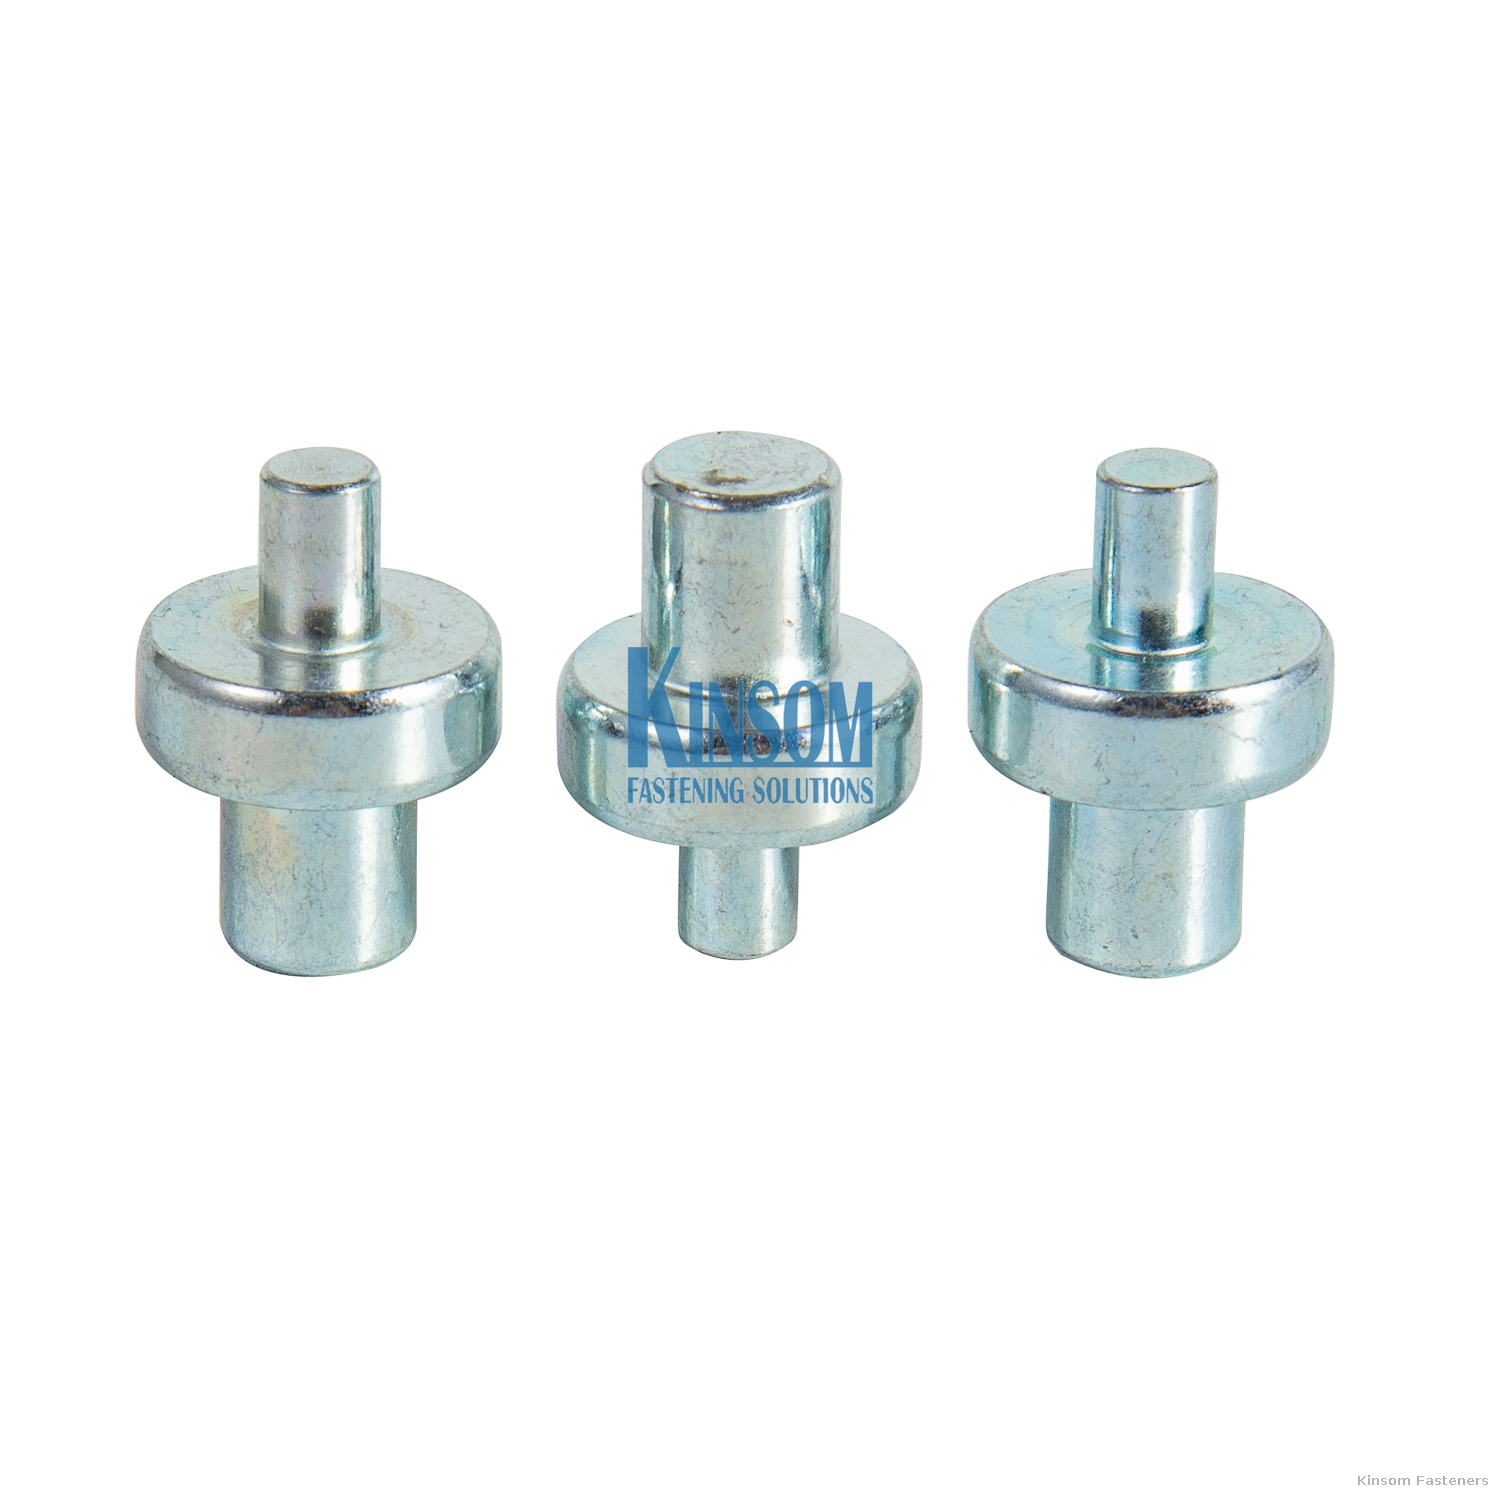 Rod stud solid rivet/Zinc clear trivalent passivate 240hours NSS tested/studs riveting steel industry fasteners